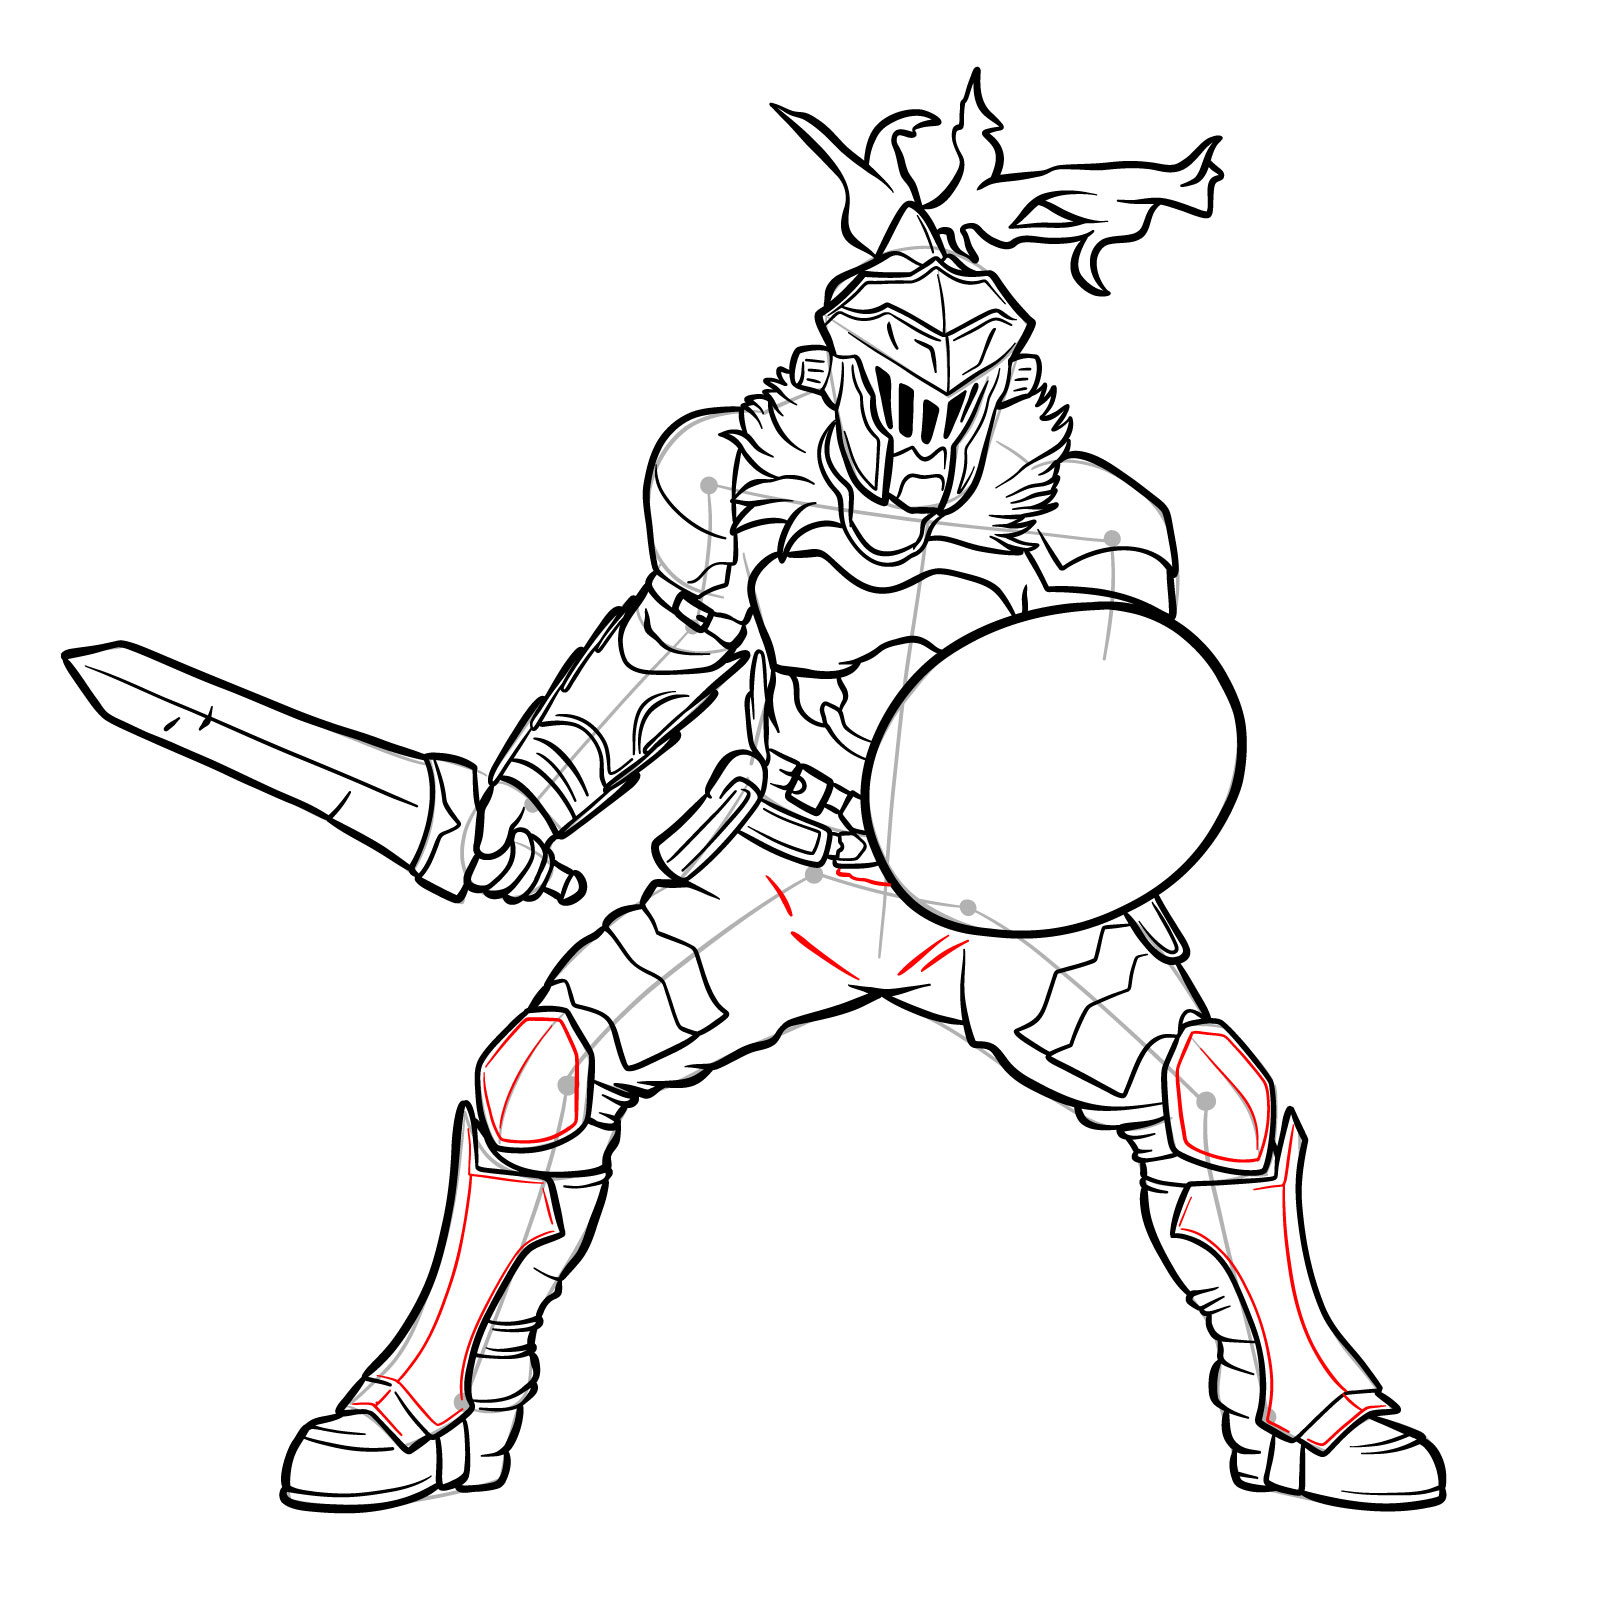 How to Draw Goblin Slayer in battle stance - step 38